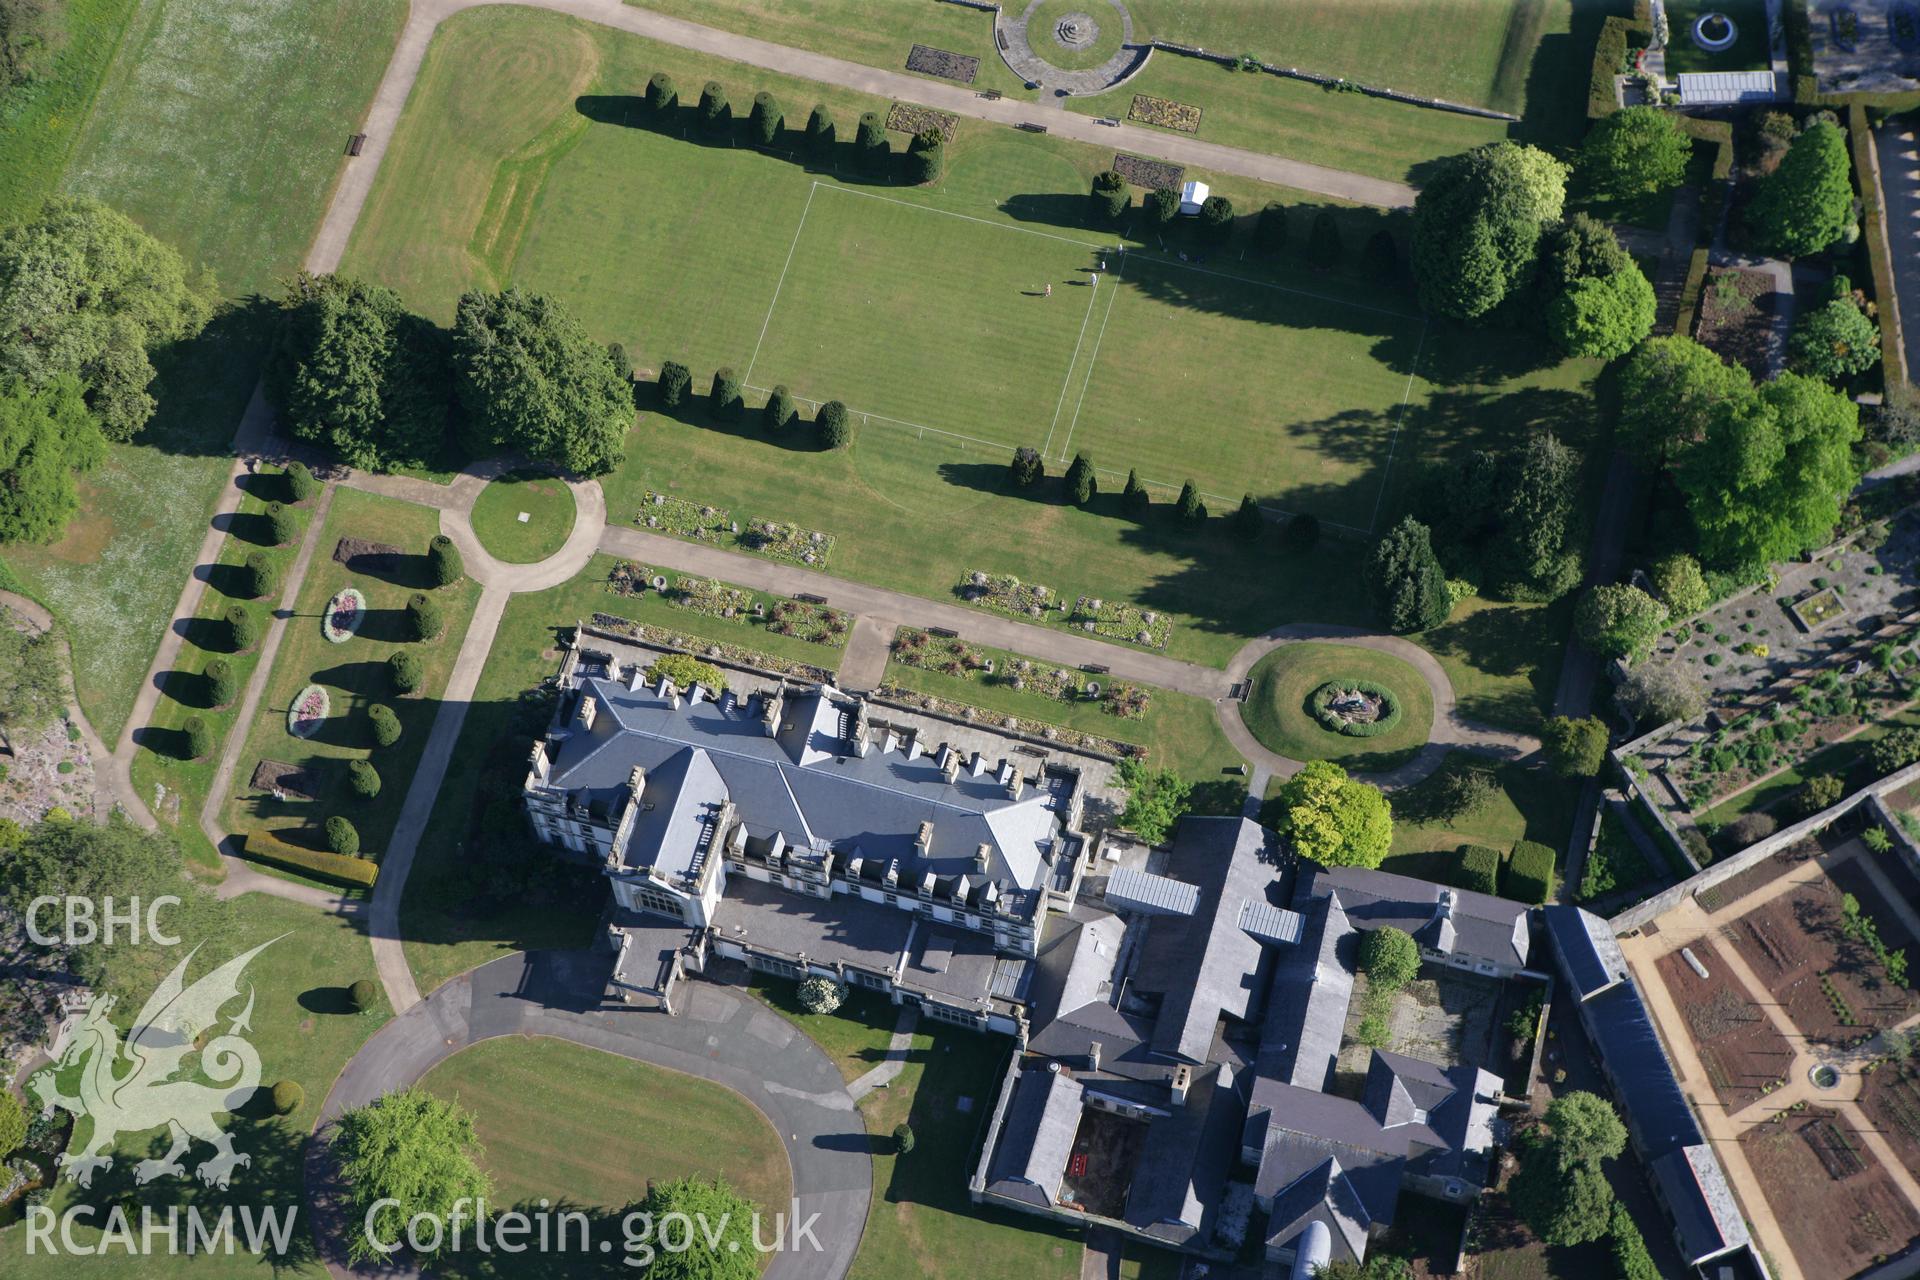 RCAHMW colour oblique photograph of Dyffryn House and Gardens, St. Nicholas. Taken by Toby Driver on 24/05/2010.